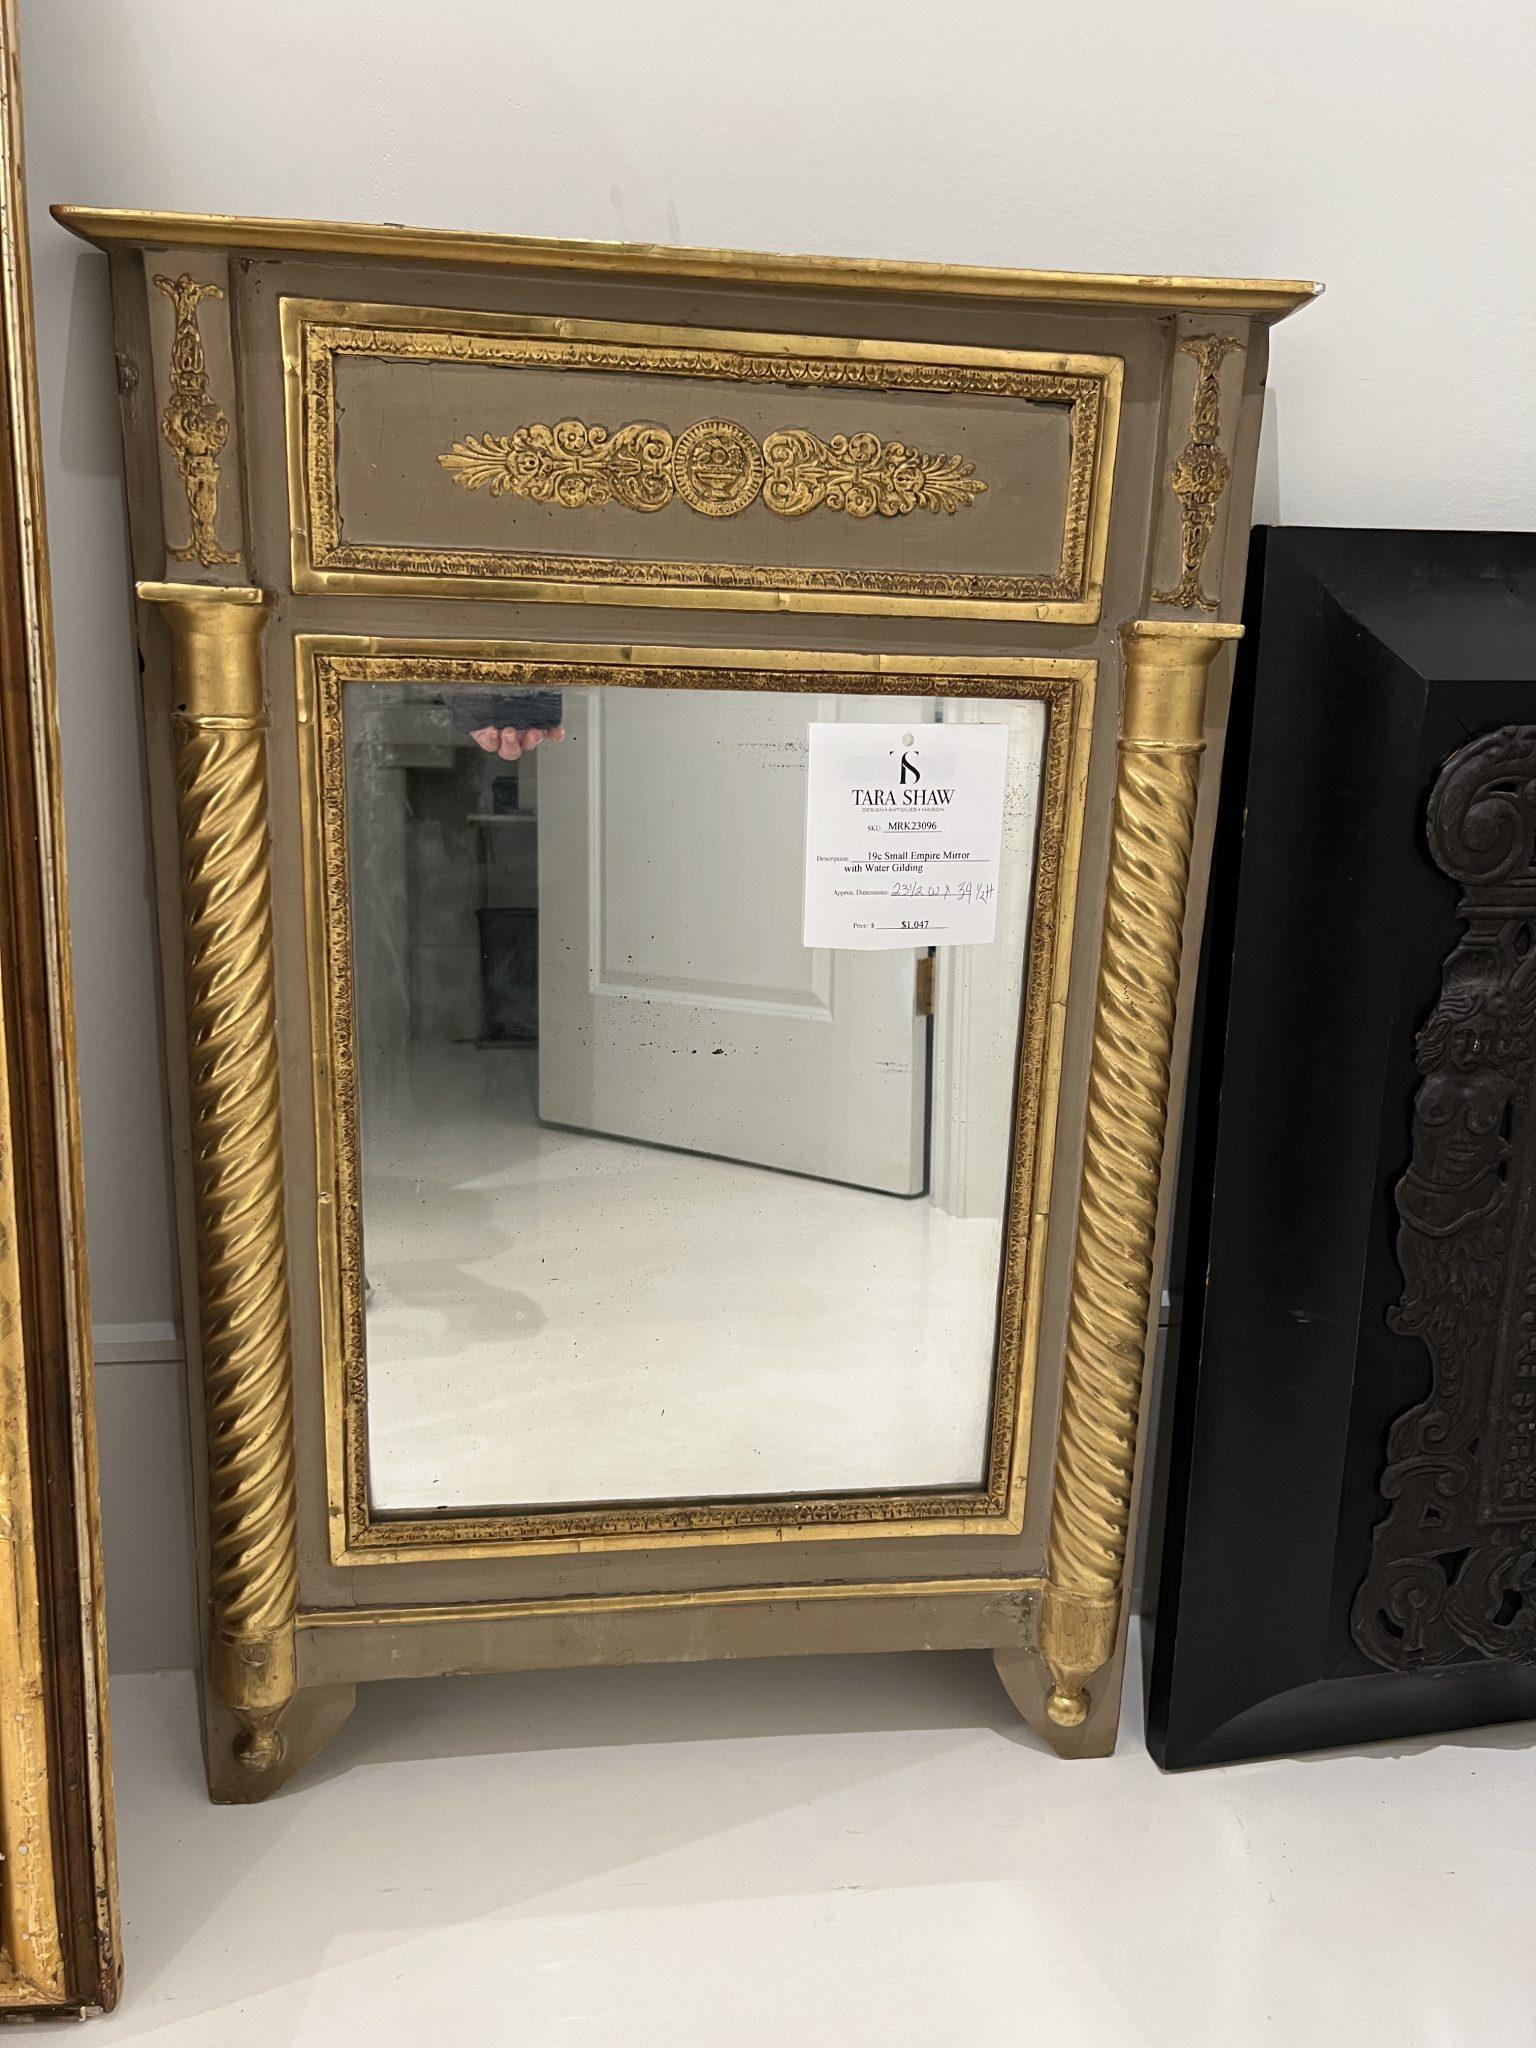 Beautiful mid-19th century gilded mirror with intricate details. Would add class to any room.